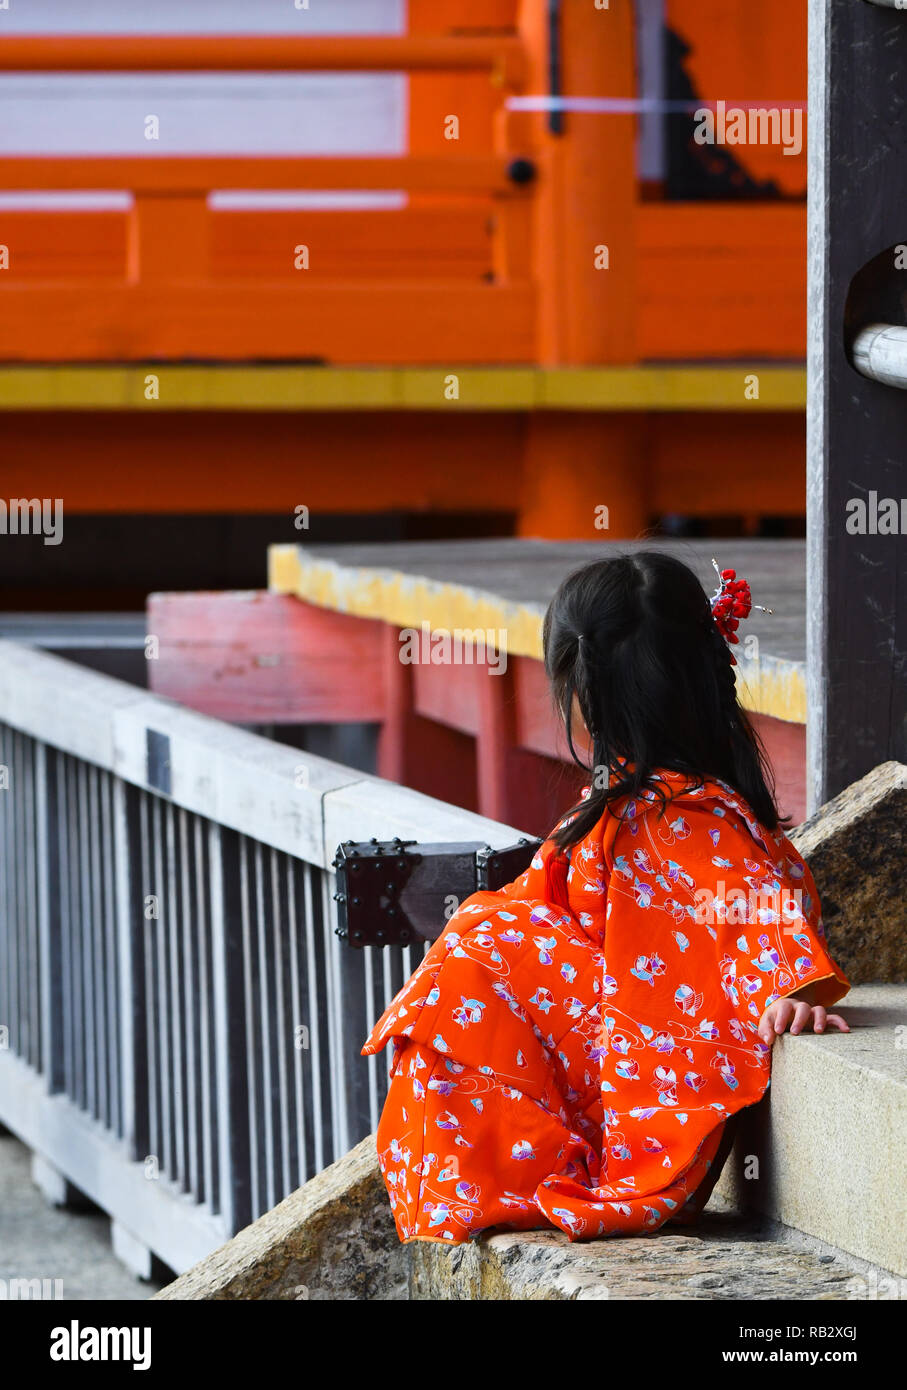 Osaka, Japan. 2nd Jan, 2019. Riko Kasam of Osaka Japan sits on the stairs of one of the structures at the Iconic Buddhist temple Kiyomizu-dera on Mount Otowa known for the scenic views. On January 2, 2019. Photo by: Ramiro Agustin Vargas Tabares Credit: Ramiro Agustin Vargas Tabares/ZUMA Wire/Alamy Live News Stock Photo